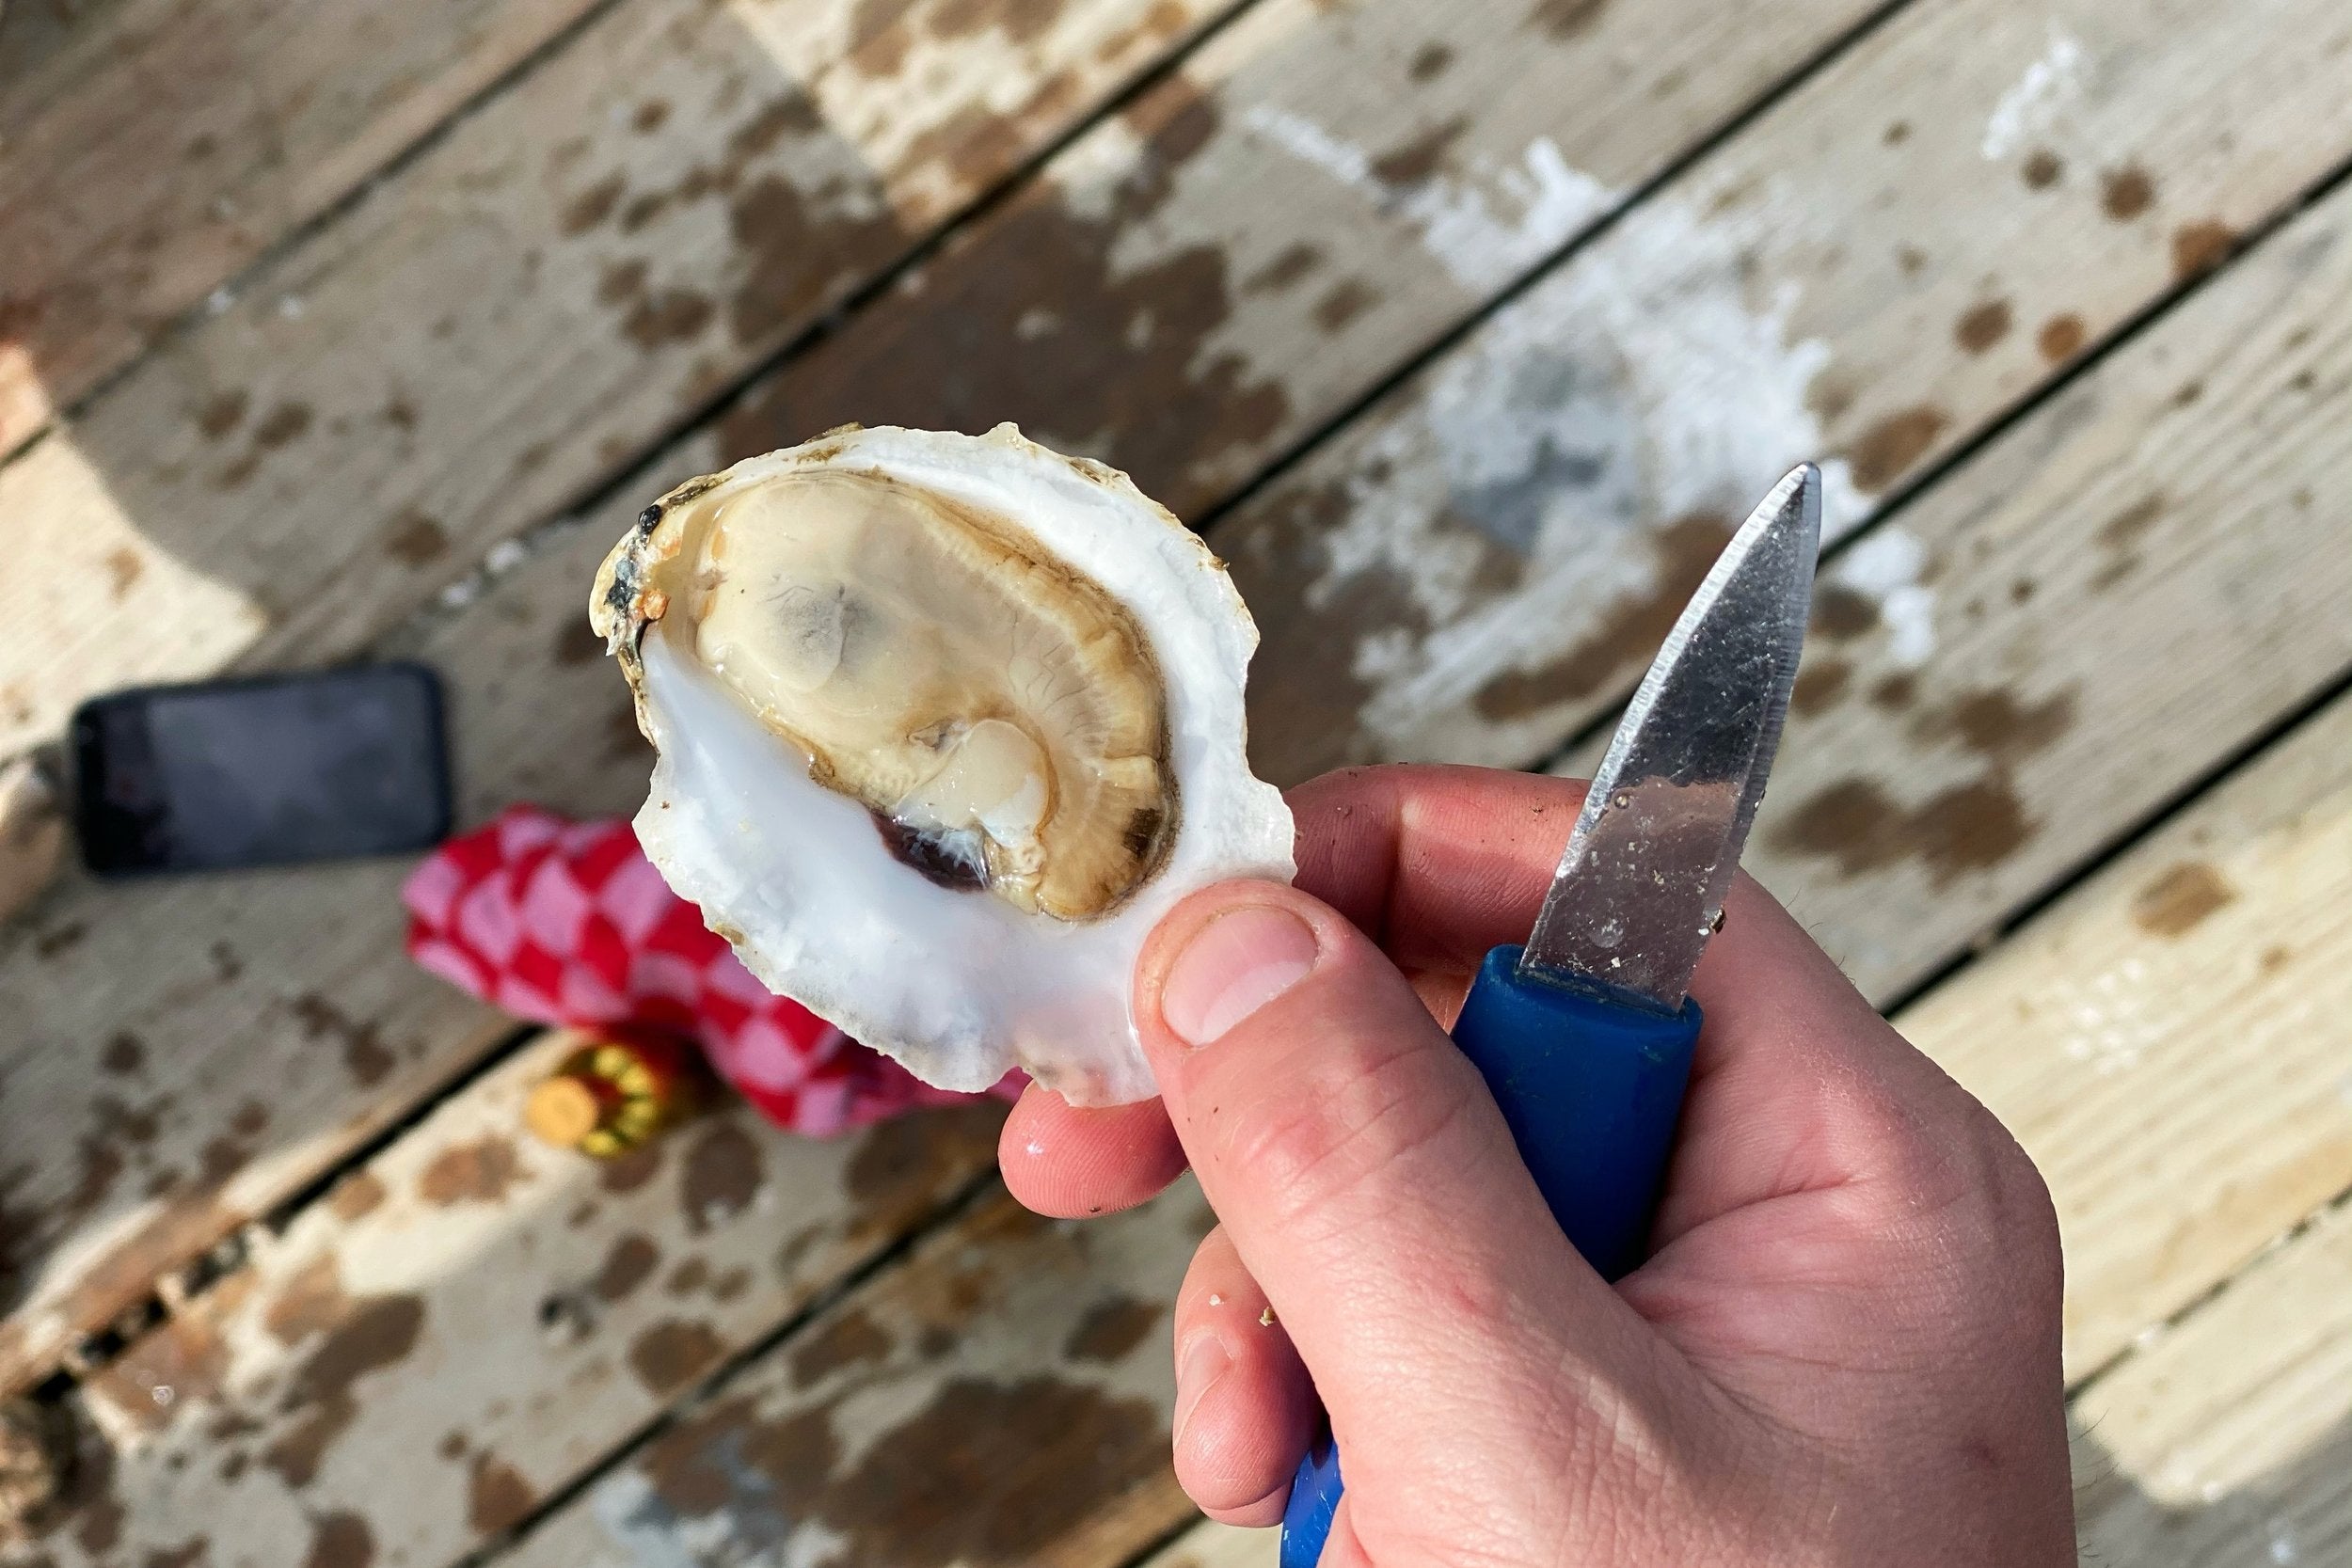 The Maine Oyster Company: A Hub for Community, Experiences, and Stories